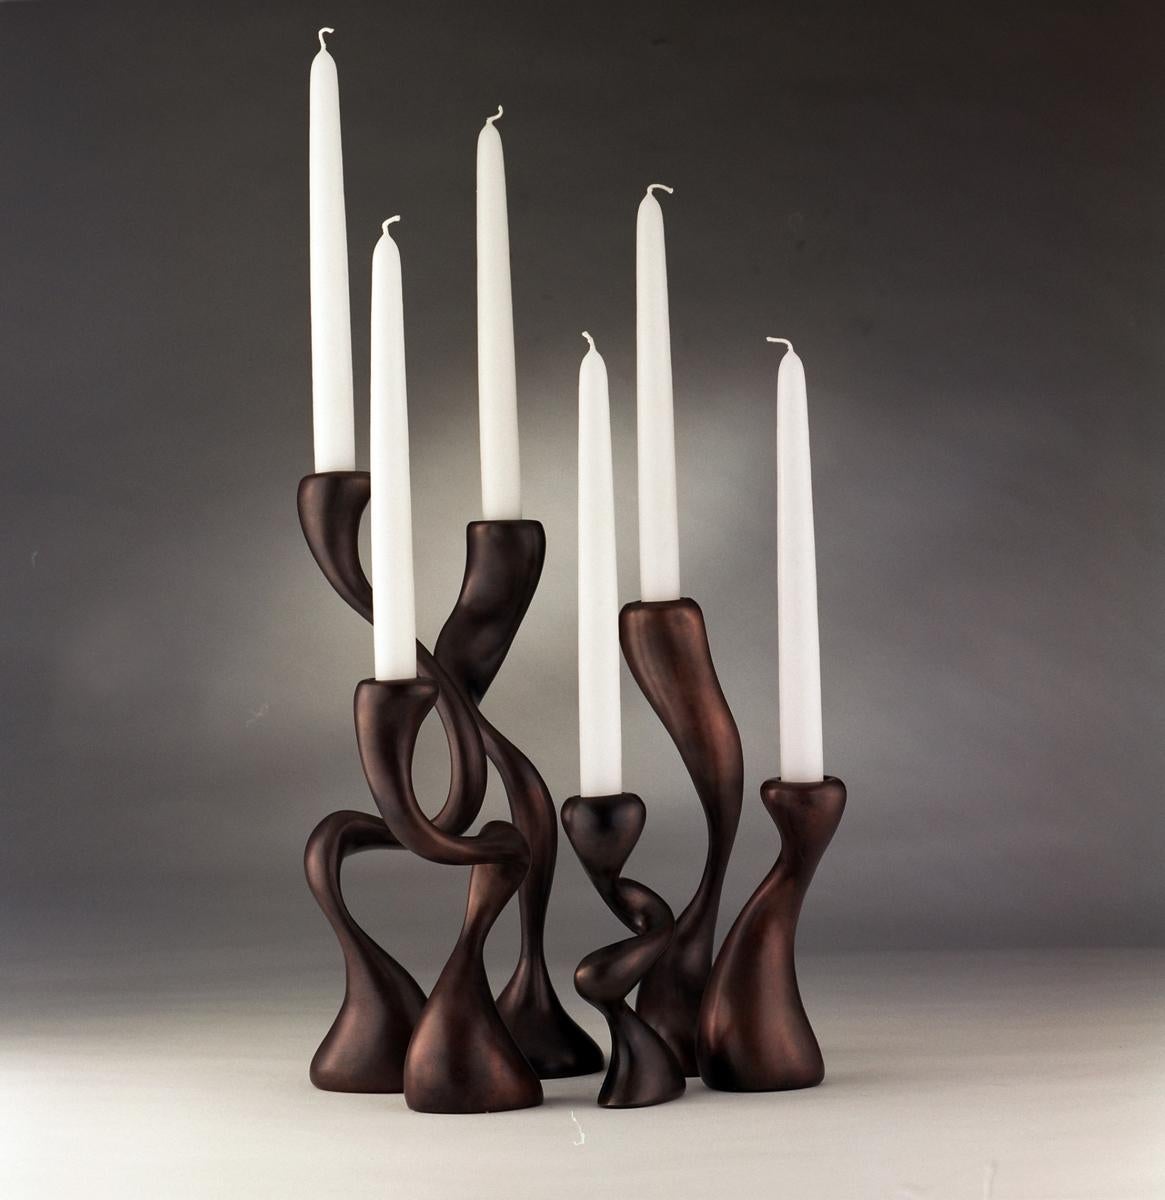 Set of Five  Anna Mae Candlesticks / Candleholders, Recycled Cast Red-Bronze, Chicago,USA,  2003. Jordan Mozer (b. 1958), Collection of the artist. Signed. Sizes vary up to 3